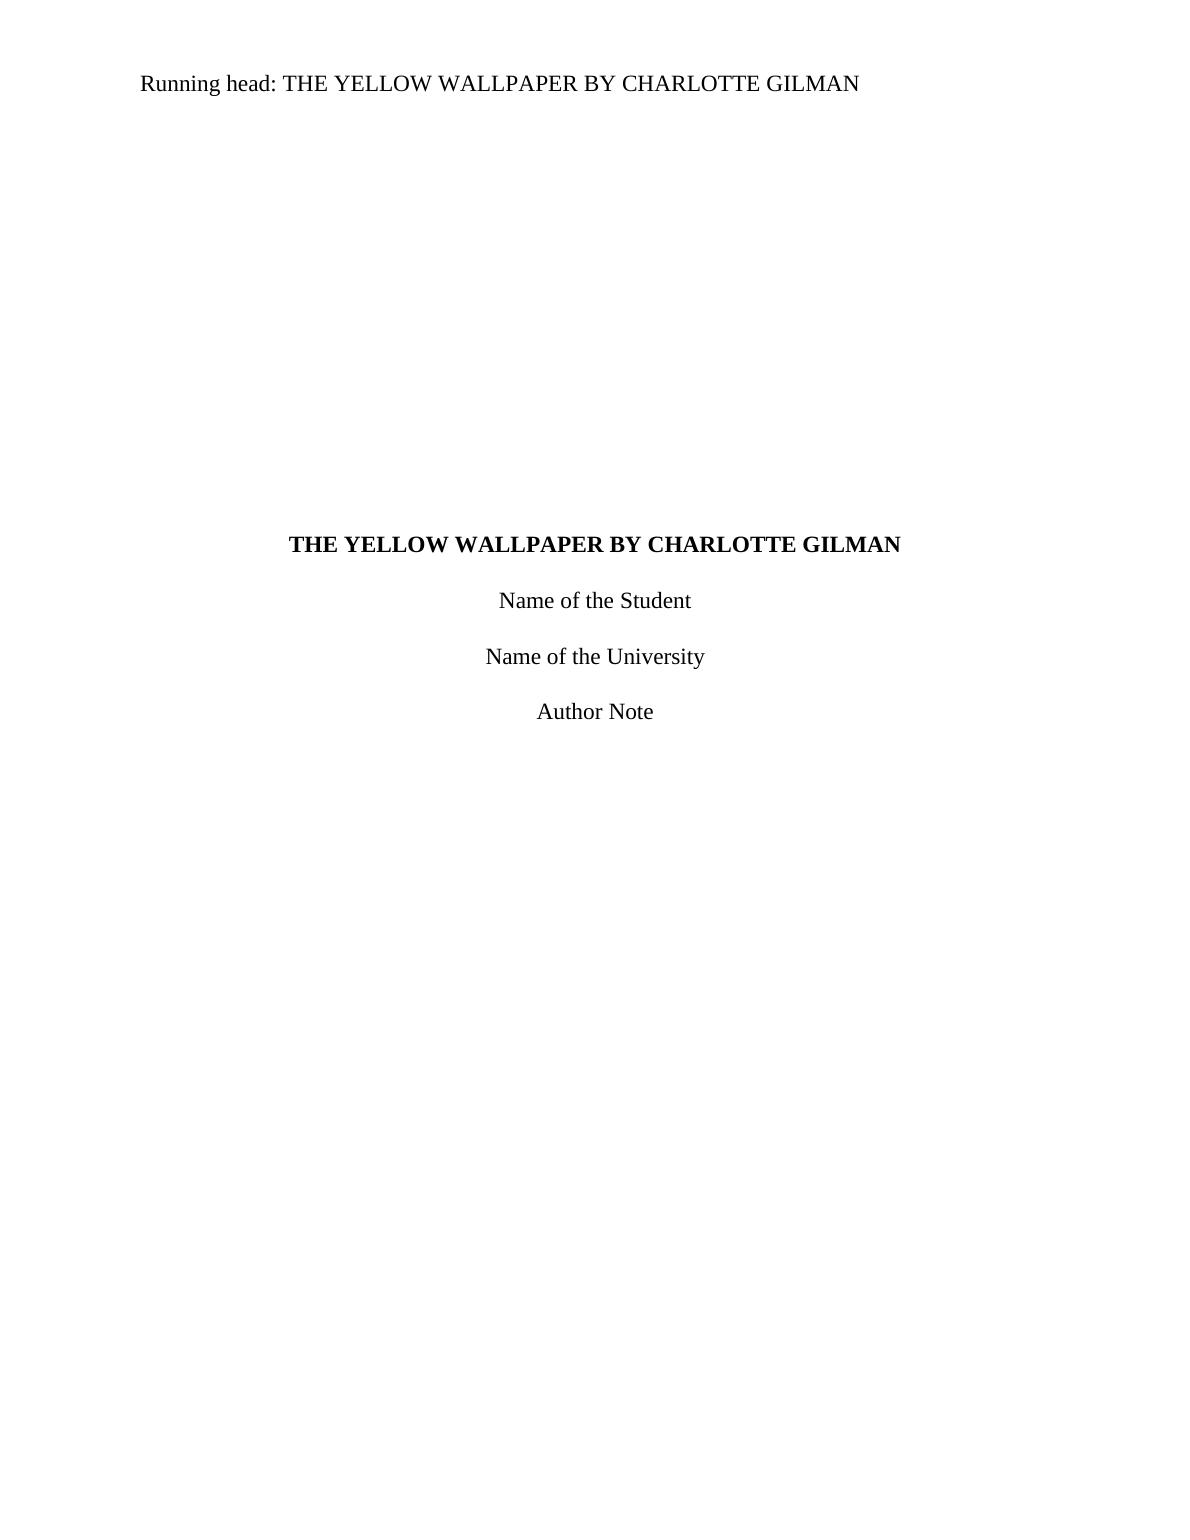 Story of "The Yellow Wallpaper" by Charlotte Gilman_1